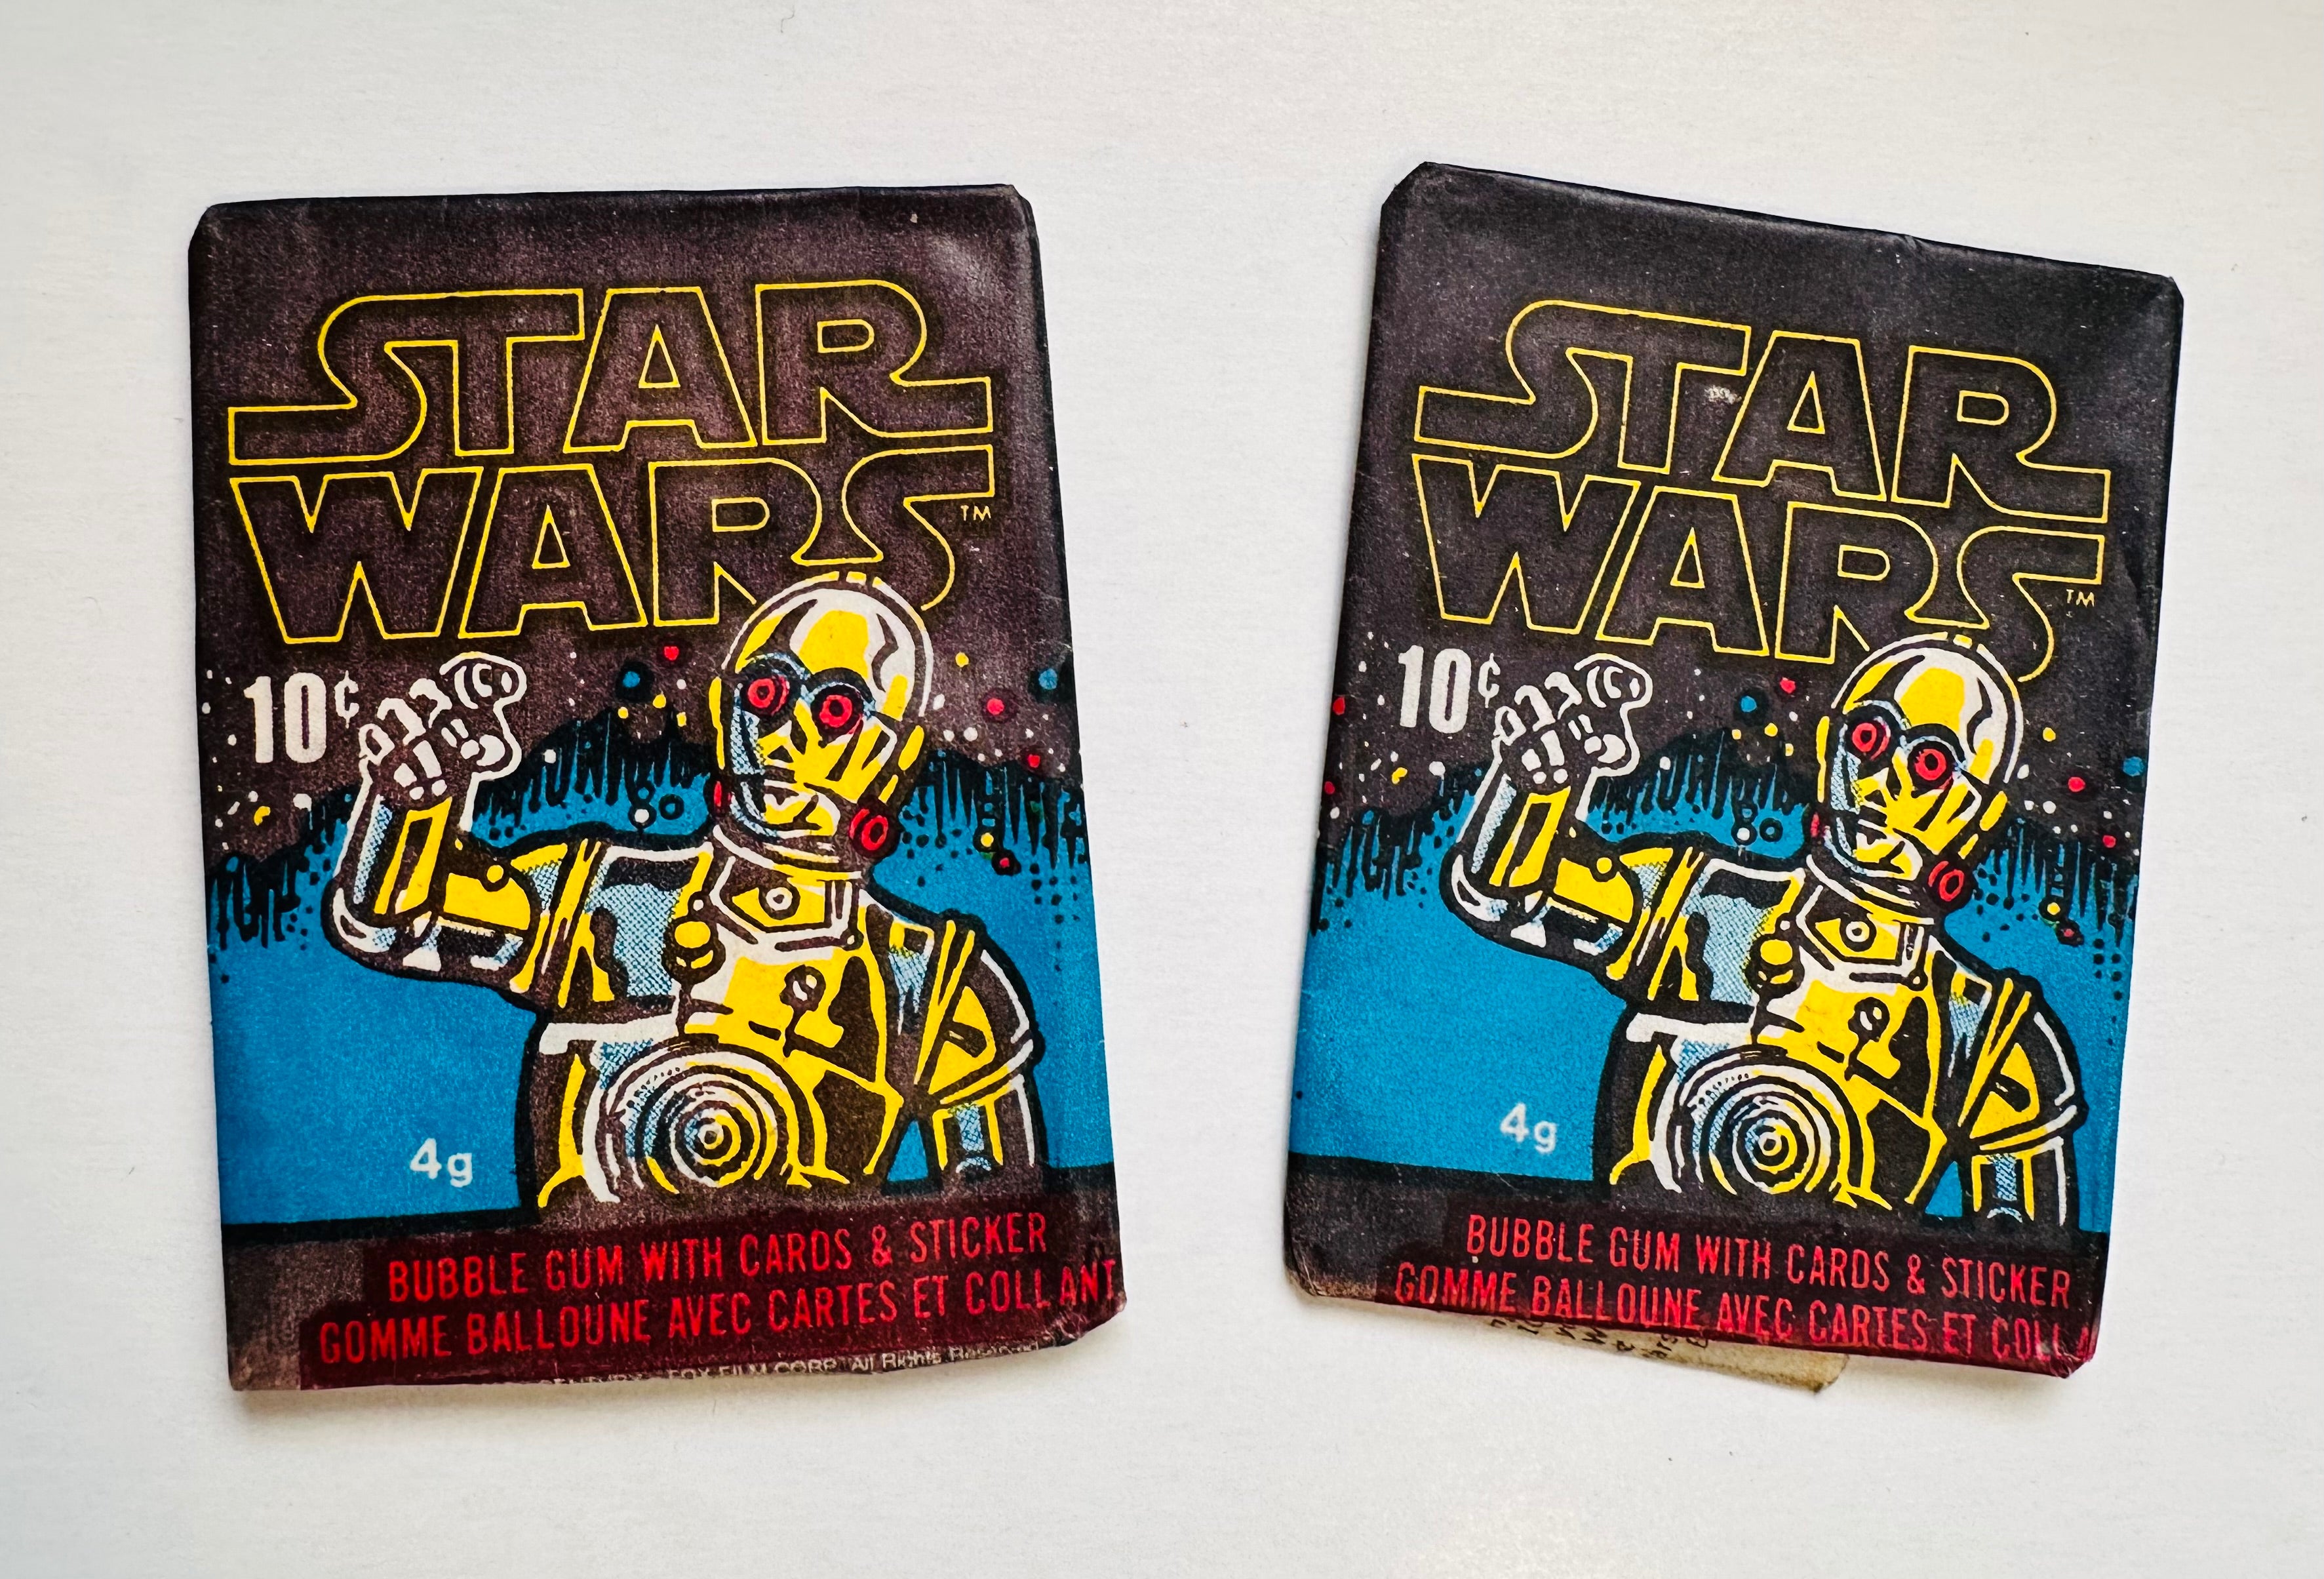 Star Wars movie first series two rare opc Canadian card wrappers 1977